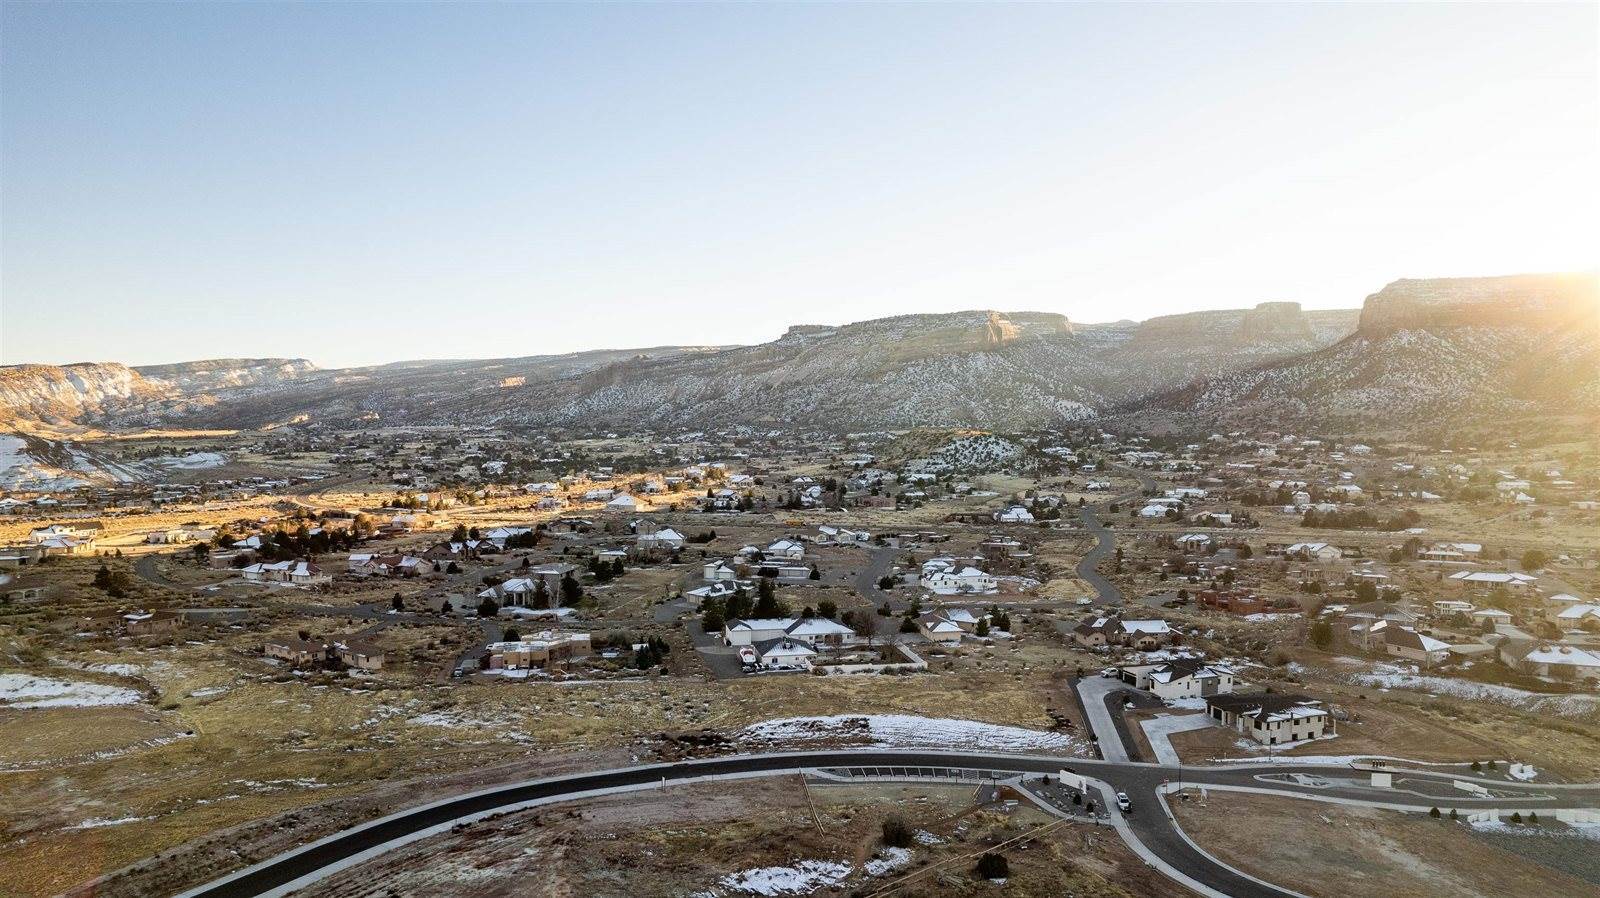 355 Canyon Rim Trail, Grand Junction, CO 81507